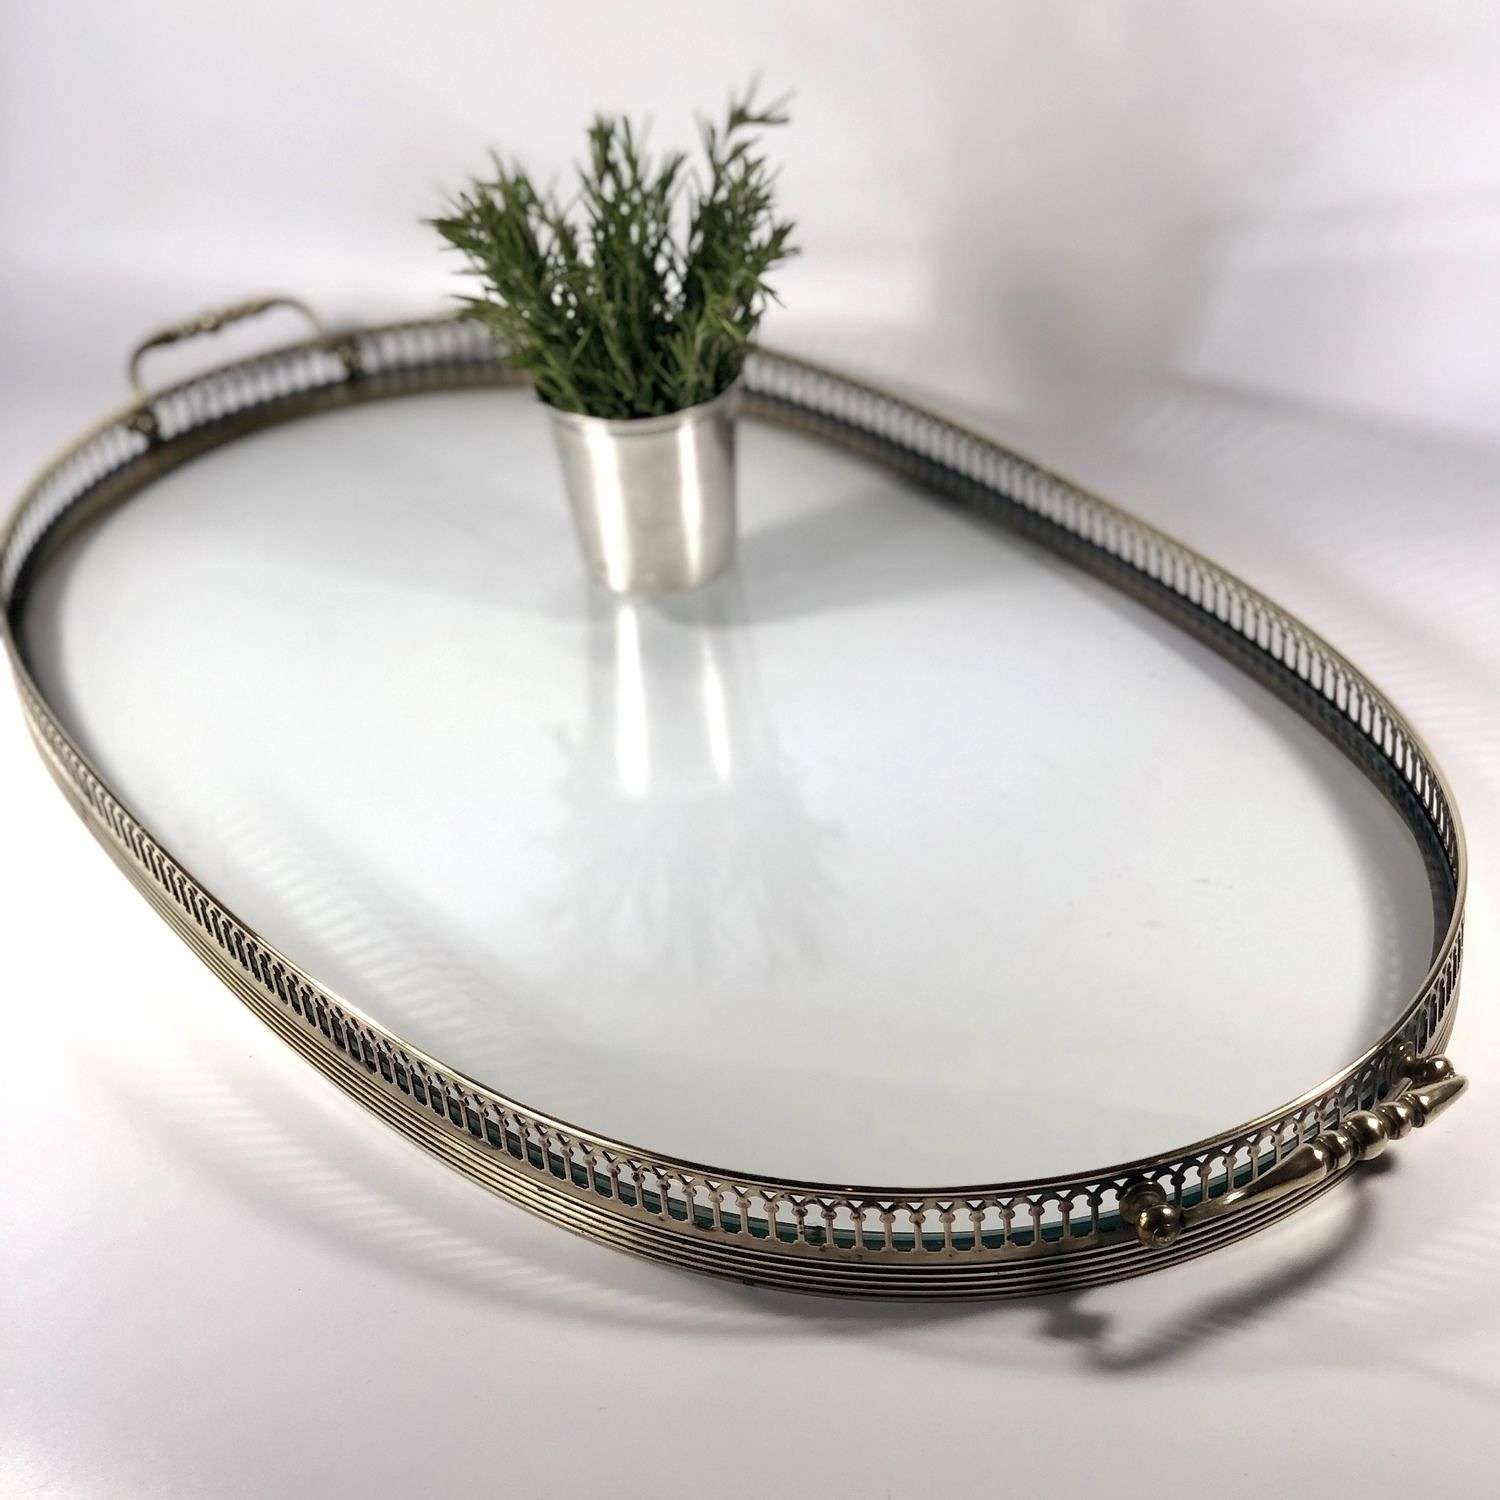 Giant oval French glass and brass serving tray